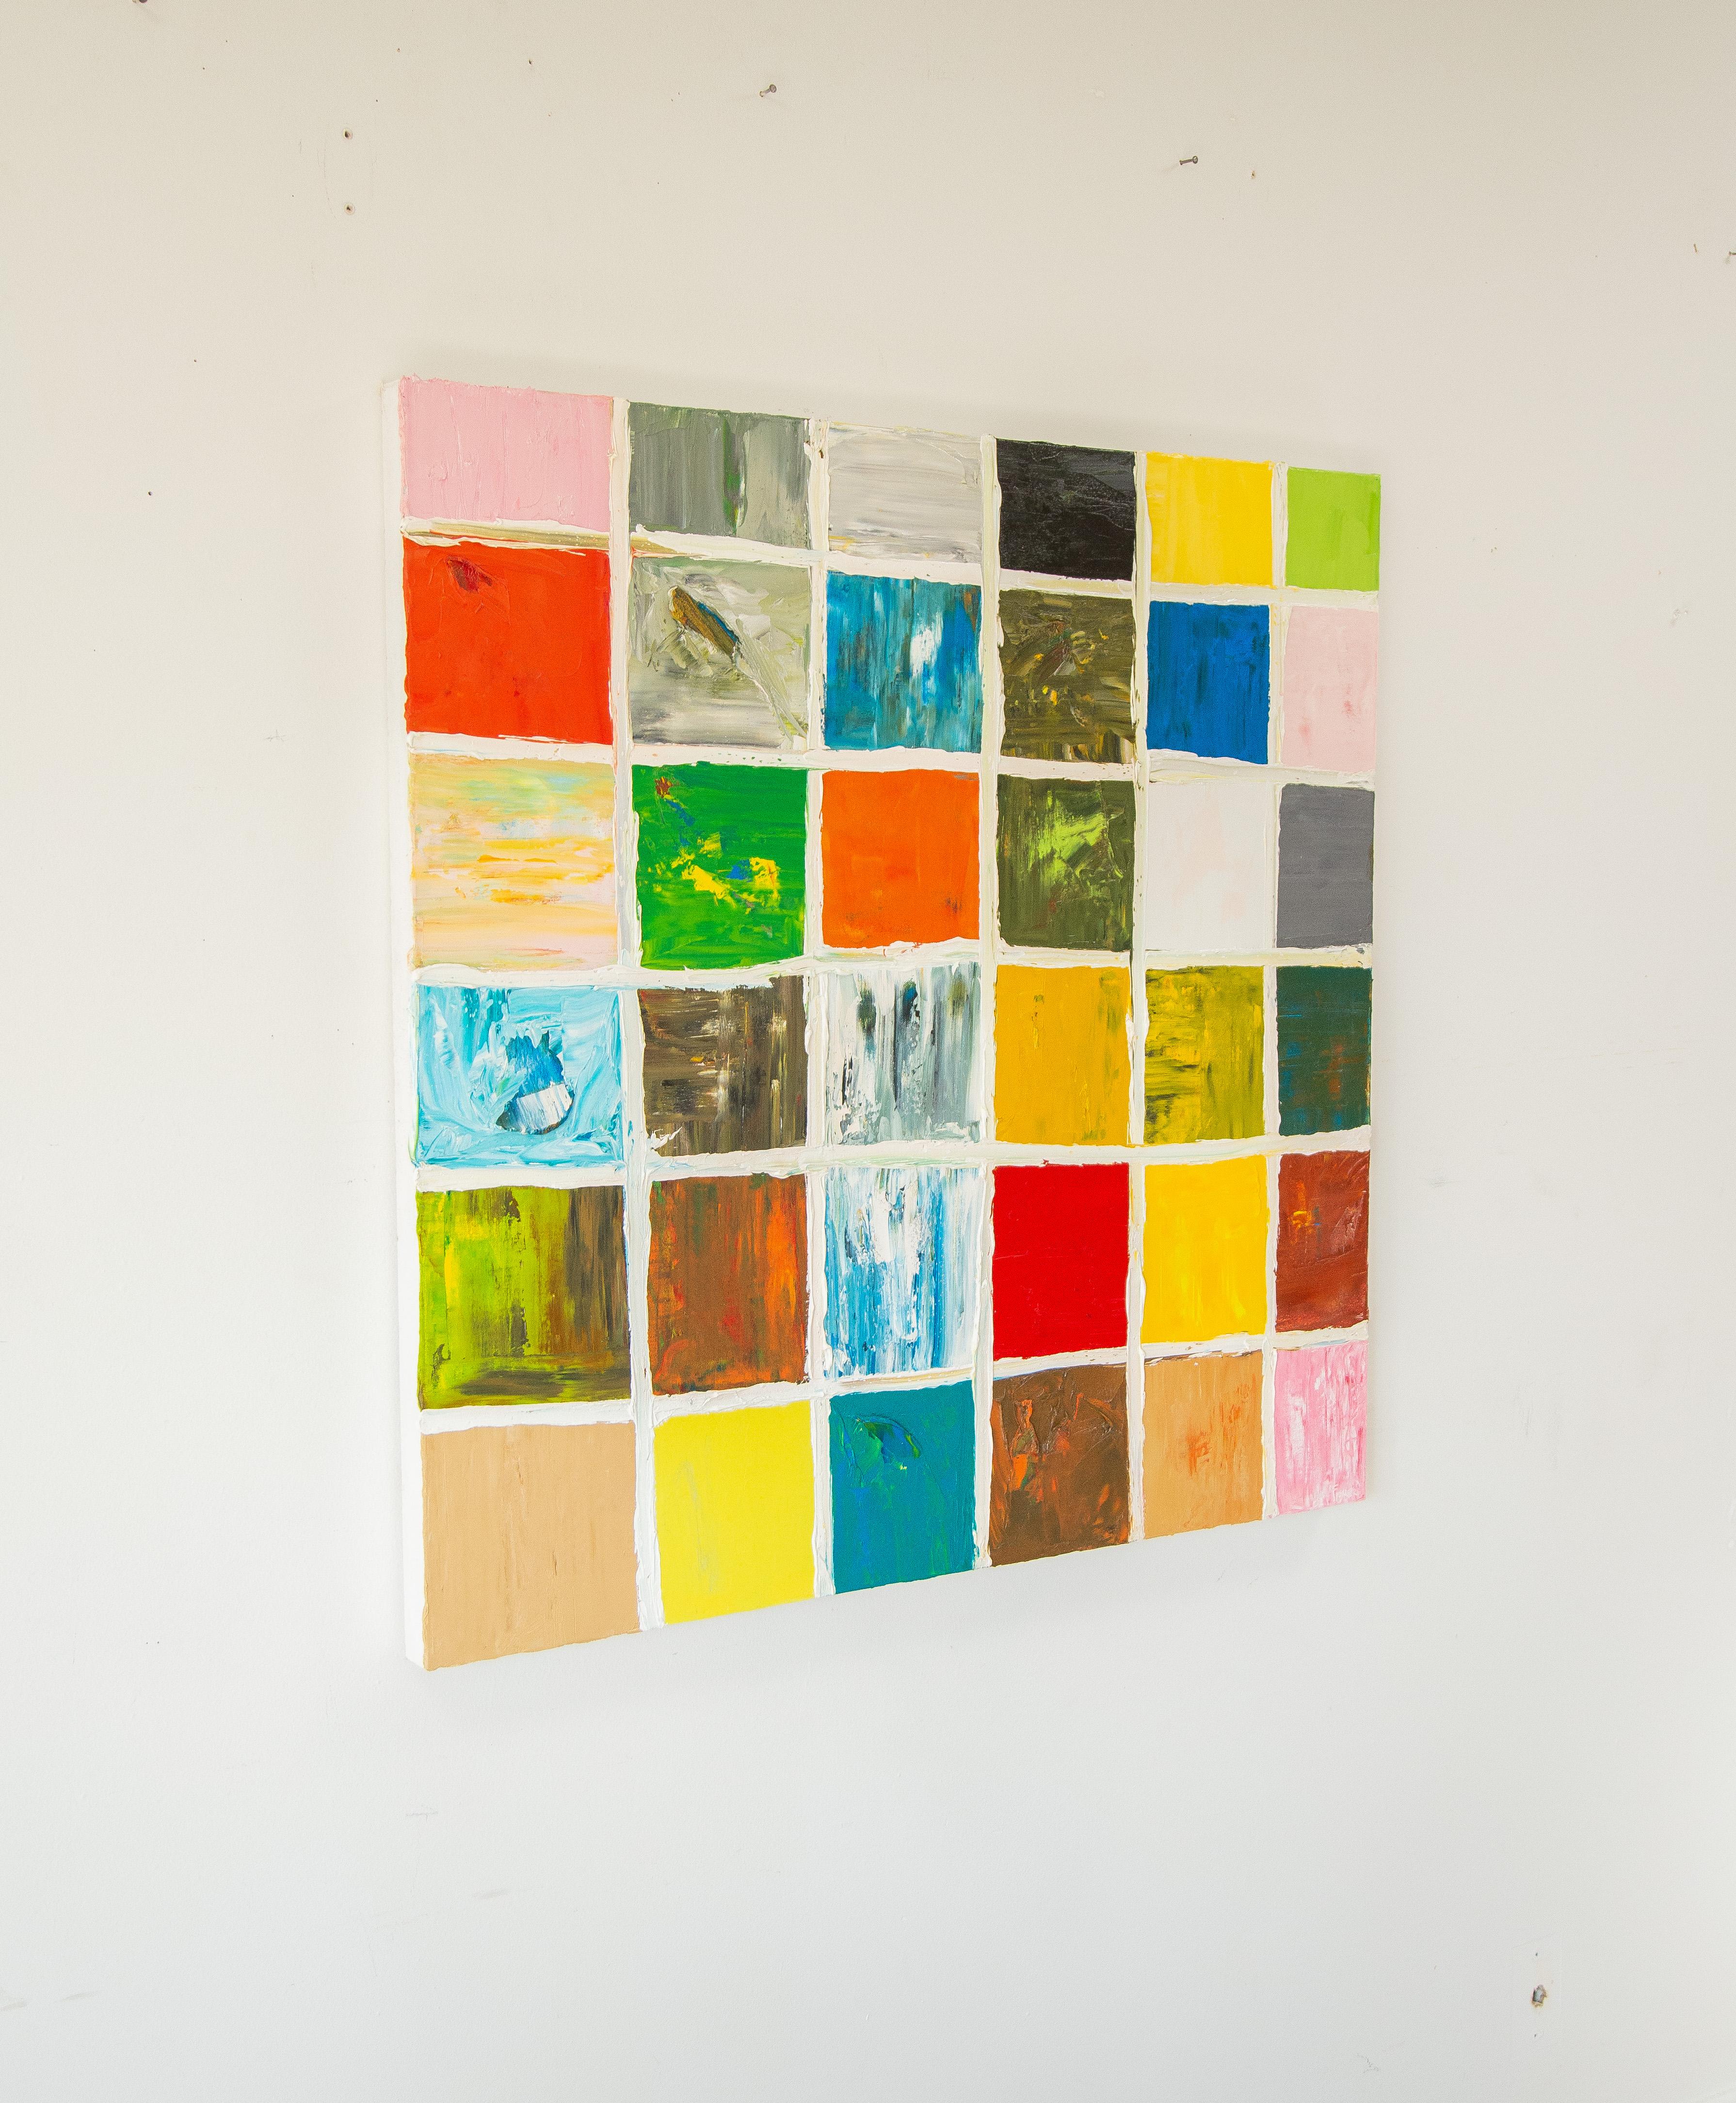 SCIENCE FICTION GRID NO. 1 - Abstract Oil Canvas, colored squares, white  For Sale 1